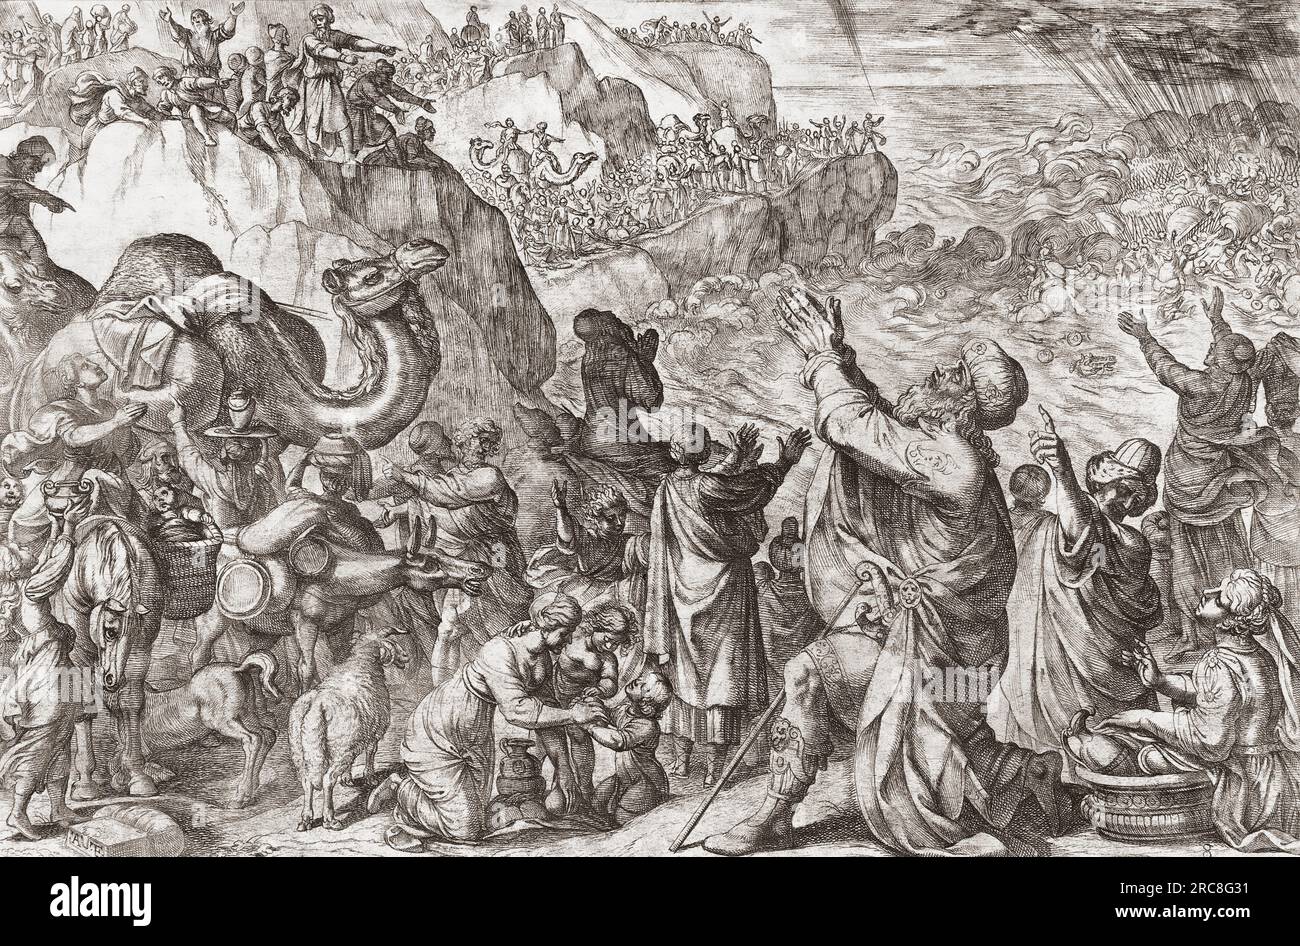 After having parted to allow Moses and his people to escape Egypt, the Red Sea closes and drowns Pharaoh's Army.  The Bible.  Old Testament.  Exodus 15:4.  After a 17th century etching by Antonio Tempesta. Stock Photo